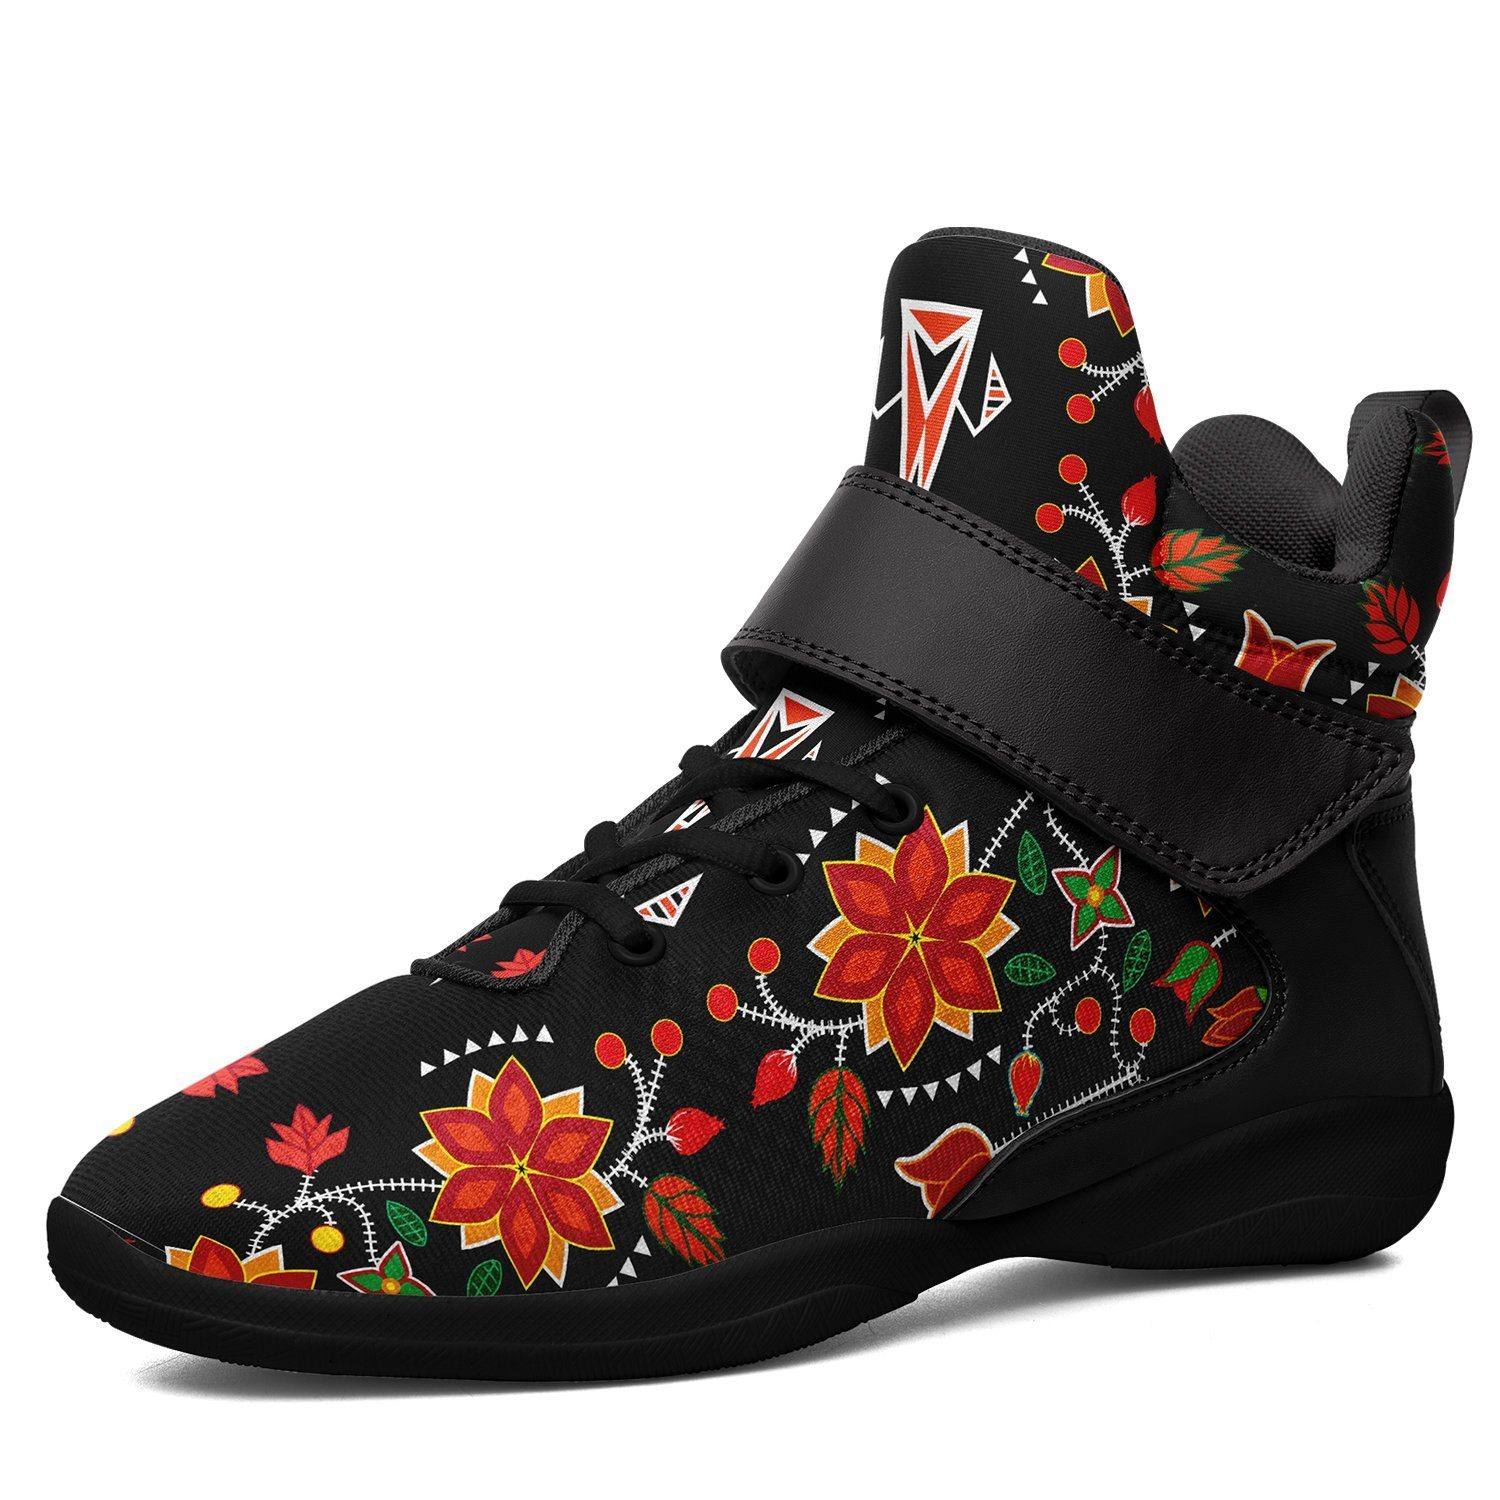 Floral Beadwork Six Bands Ipottaa Basketball / Sport High Top Shoes - Black Sole 49 Dzine US Men 7 / EUR 40 Black Sole with Black Strap 